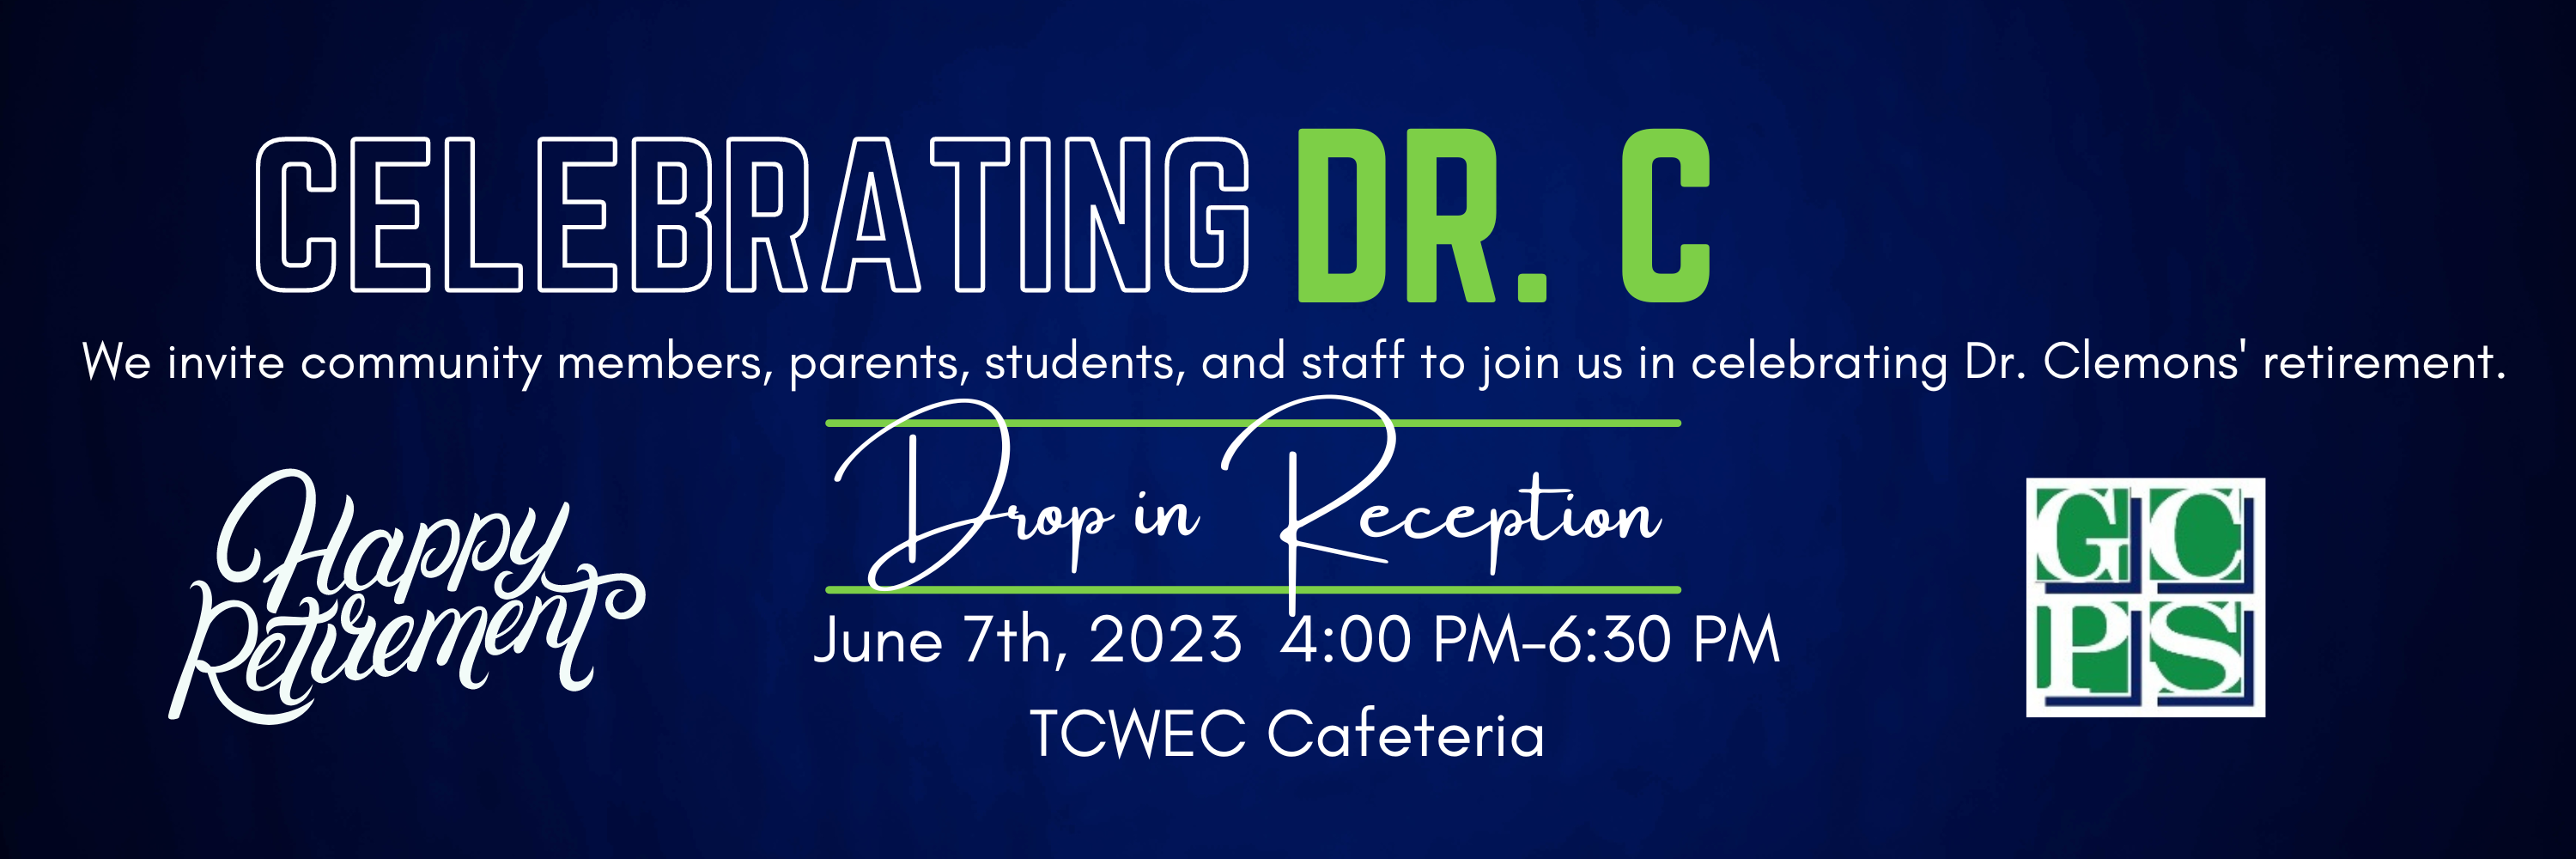 Celebrating Dr. C. We invite community members, parents, students, and staff to join us in celebrating Dr. Clemons' retirement at a drop in reception on June 7th from 4-6:30 PM in the TCEWEC Cafeteria